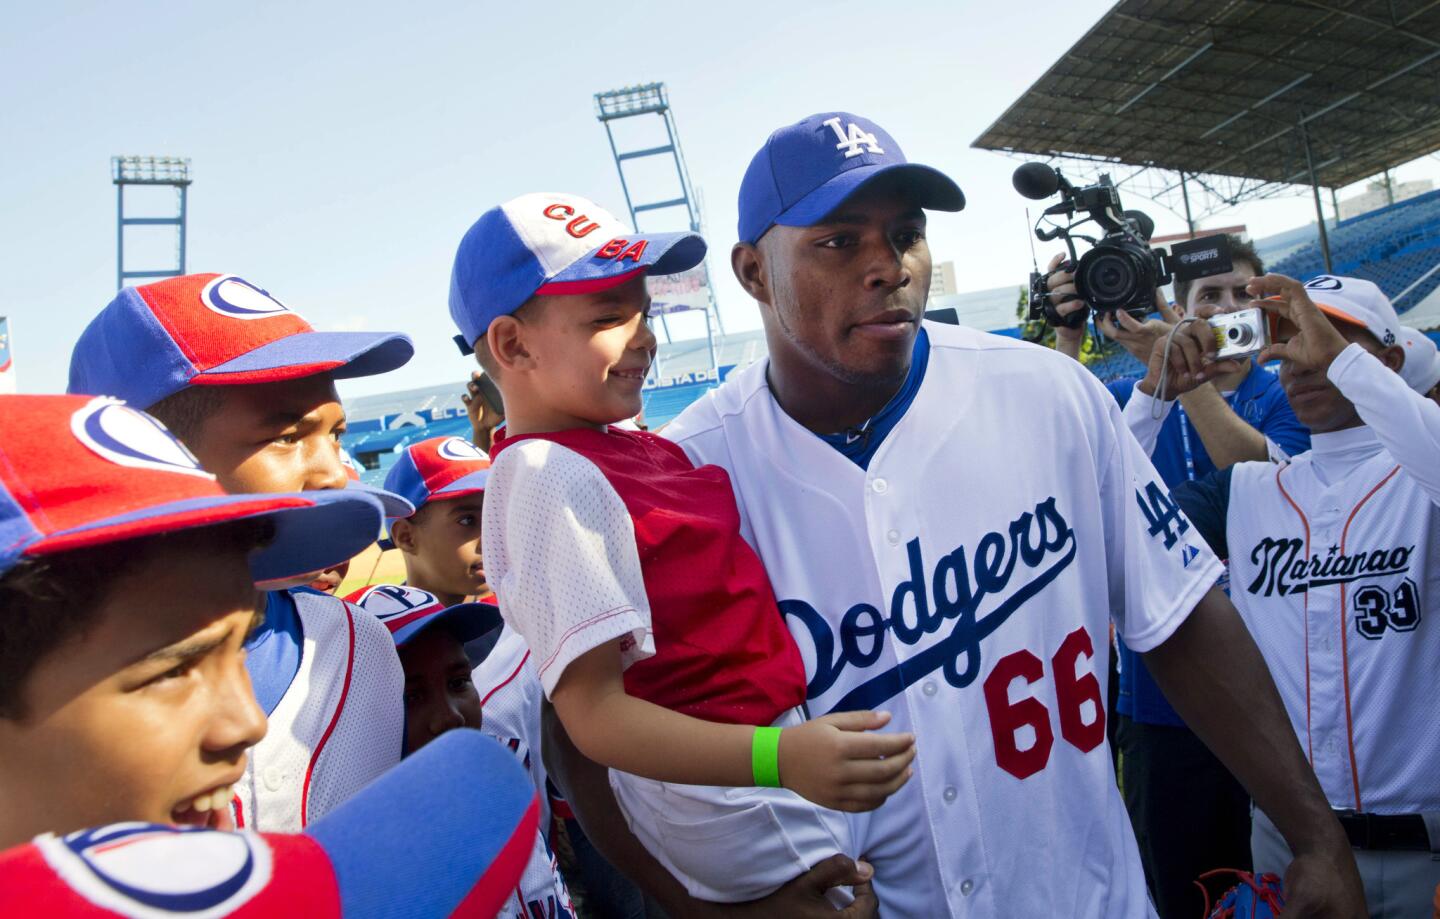 Los Angeles Dodgers player Yasiel Puig, from Cuba, holds a young baseball player as he poses for photos before giving a baseball clinic to children in Havana, Cuba, Wednesday, Dec. 16, 2015. "We're going to give our best on this visit and we appreciate the opportunity we've been given," said Puig, who left Cuba on a smuggler's fast-boat in 2012. "Everything else we leave to God and destiny." (AP Photo/Ramon Espinosa)